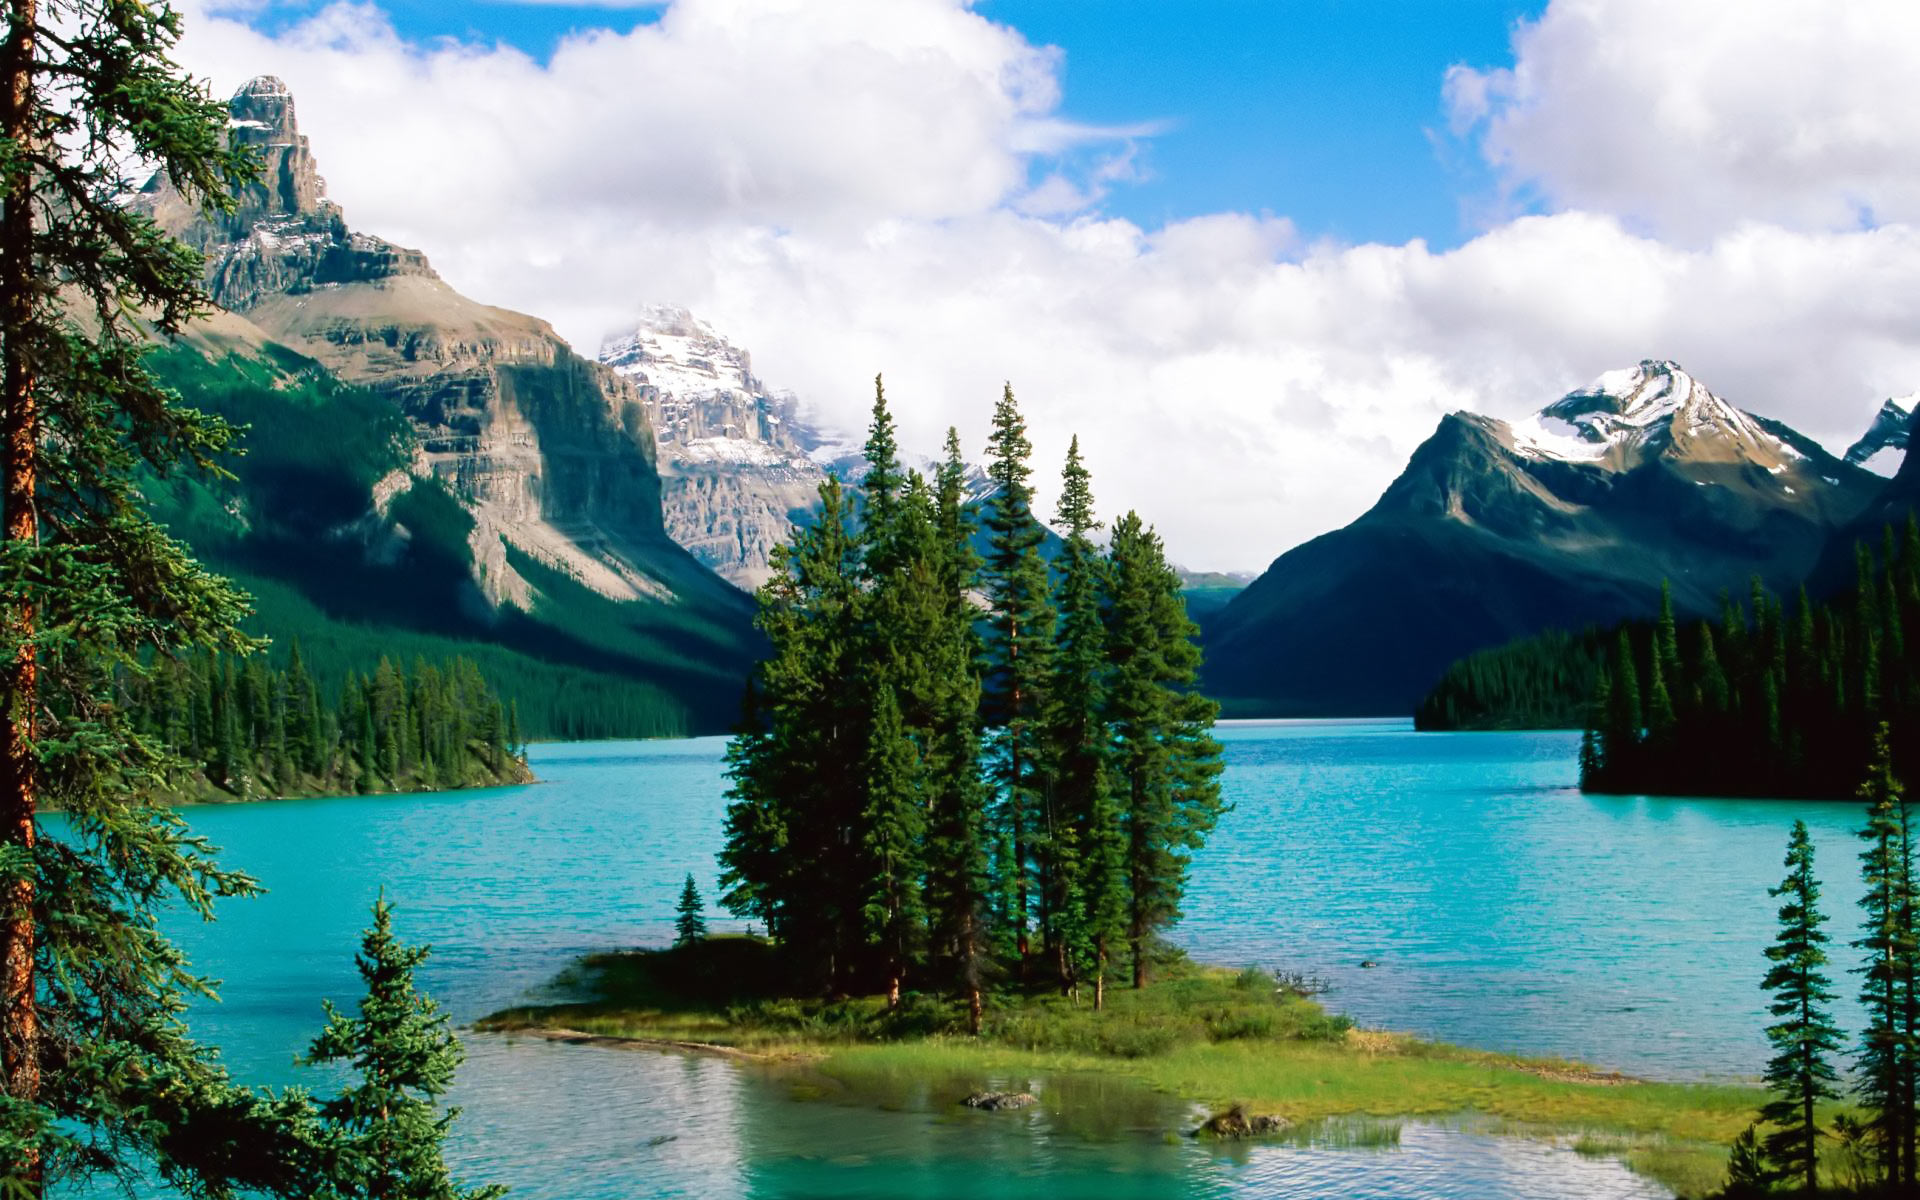 Landscape River Mountains Wallpapers Images And Backgrounds - Jasper National Park - HD Wallpaper 